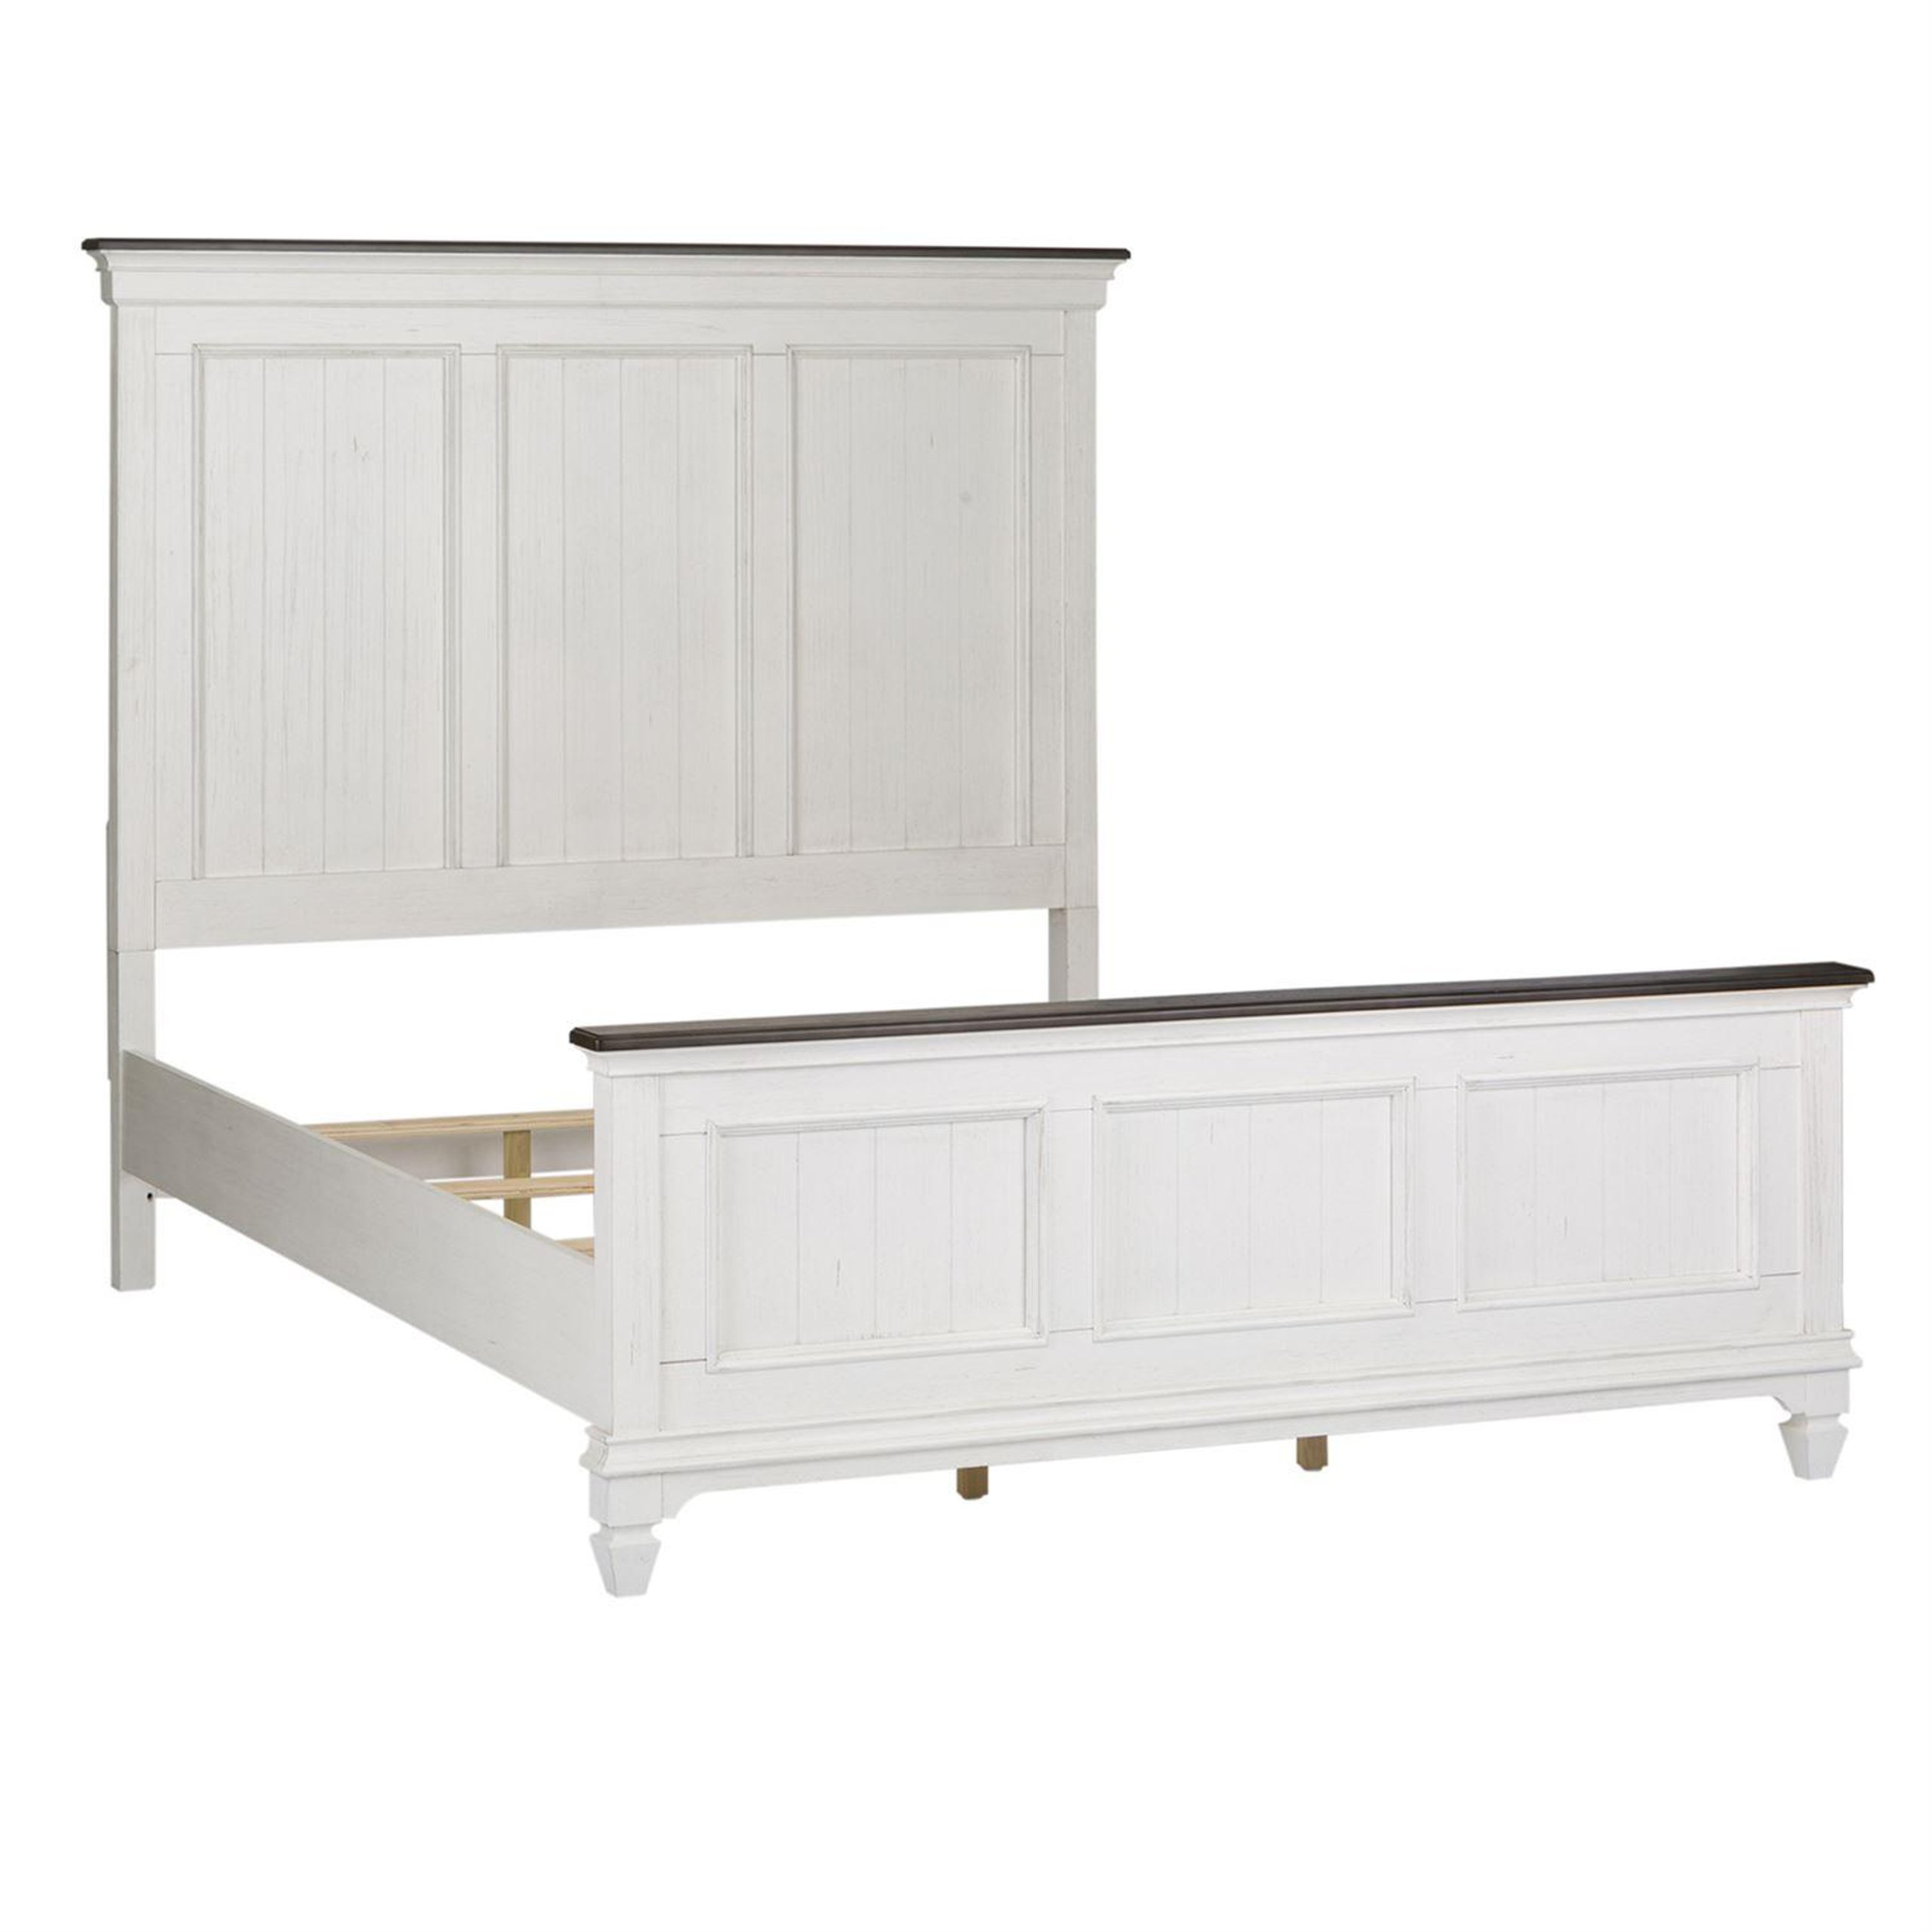 Buy Liberty Furniture Allyson Park 417 Br Panel Bed Queen Panel Bed In White Wood Online